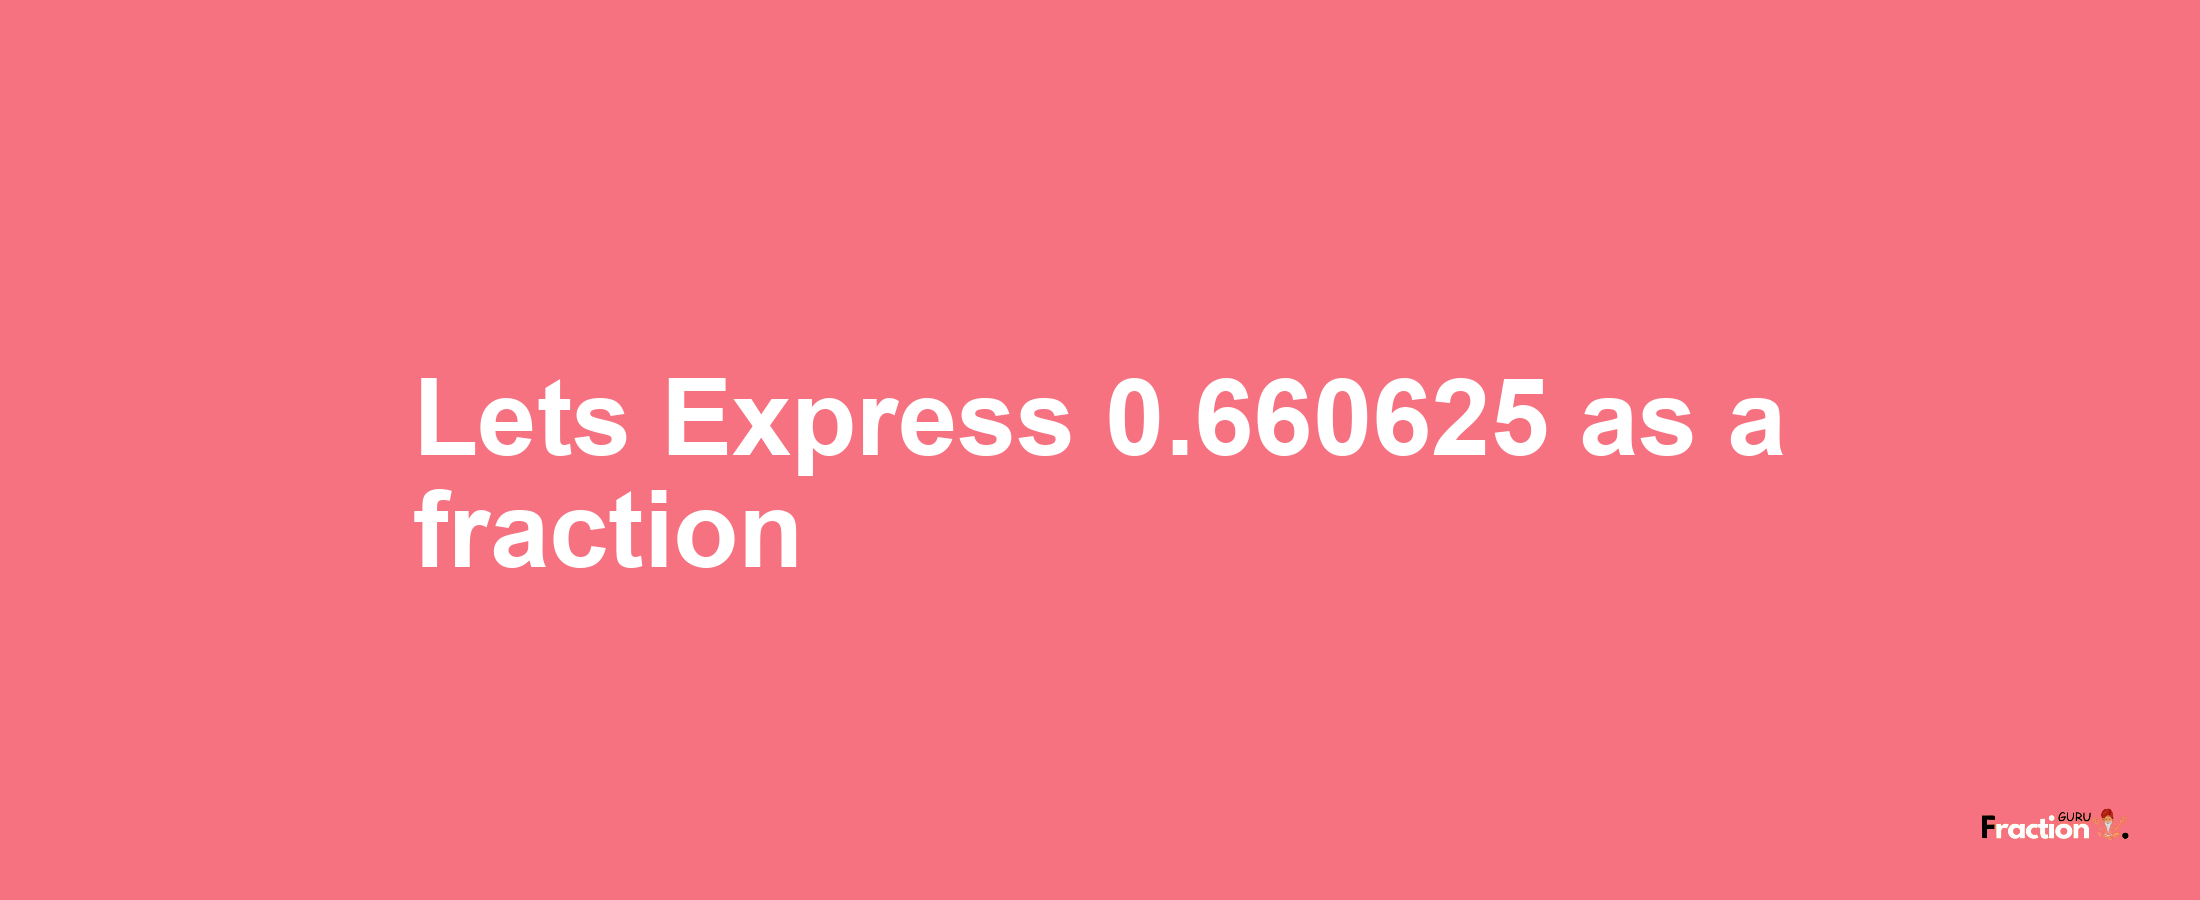 Lets Express 0.660625 as afraction